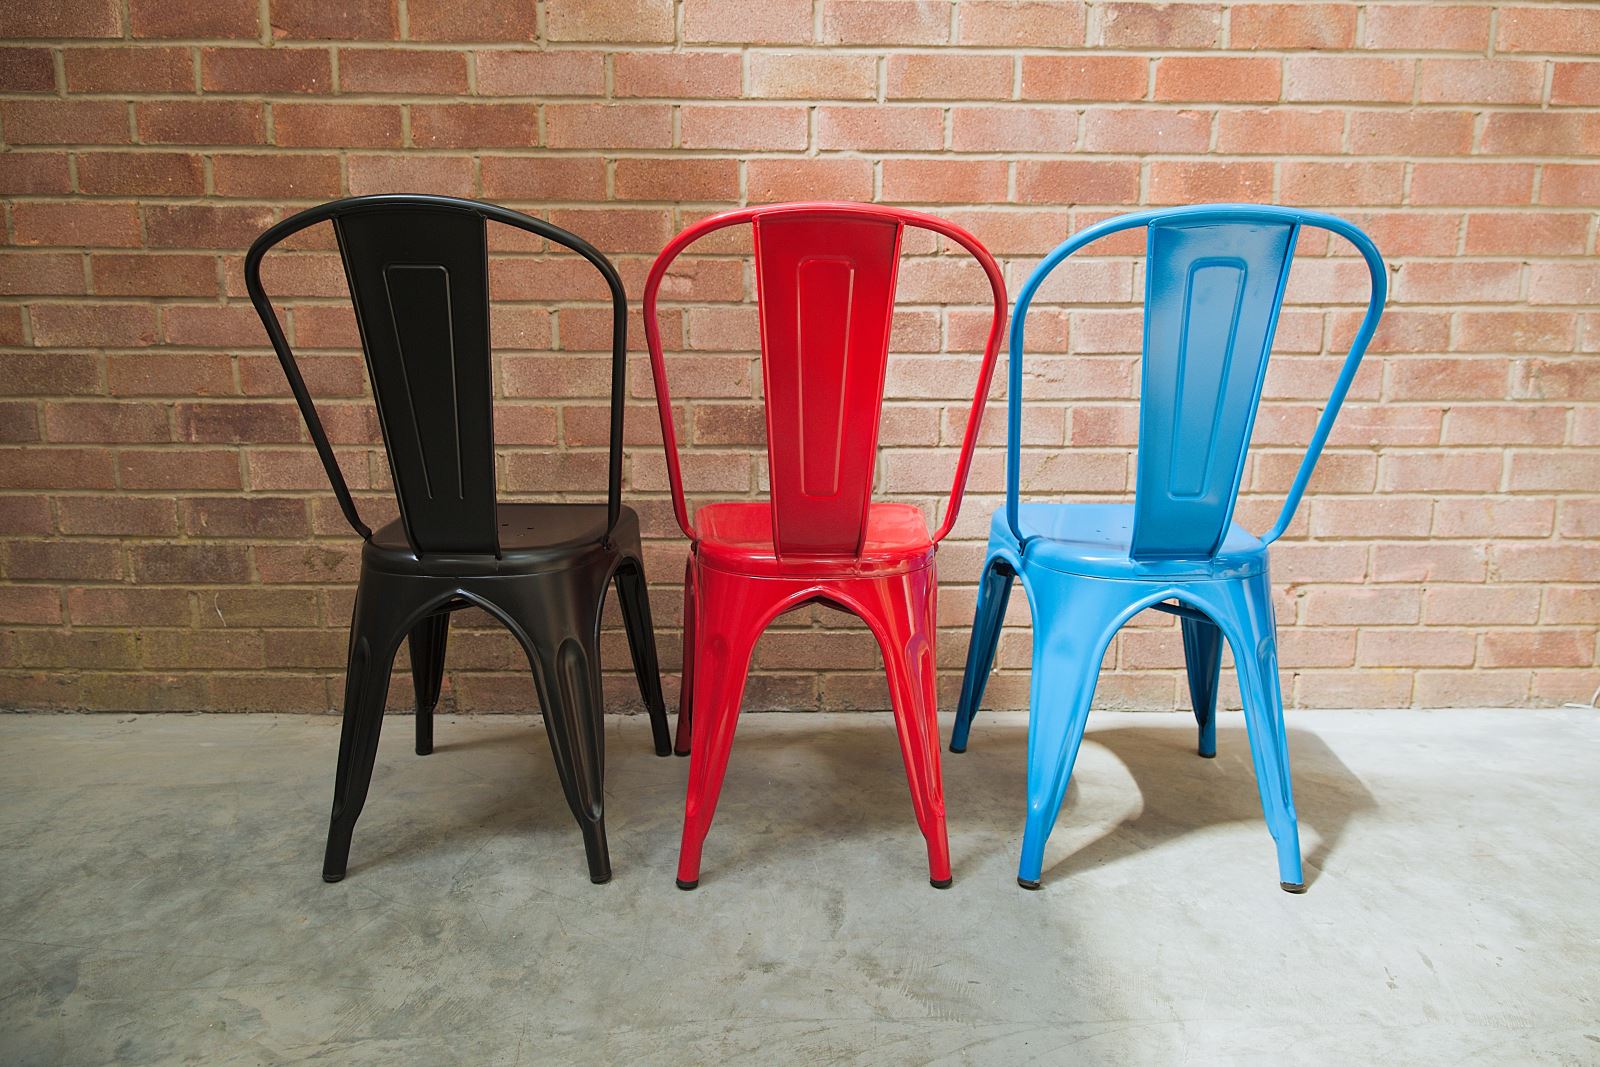 Coloured metal stack chairs - Trent Furniture